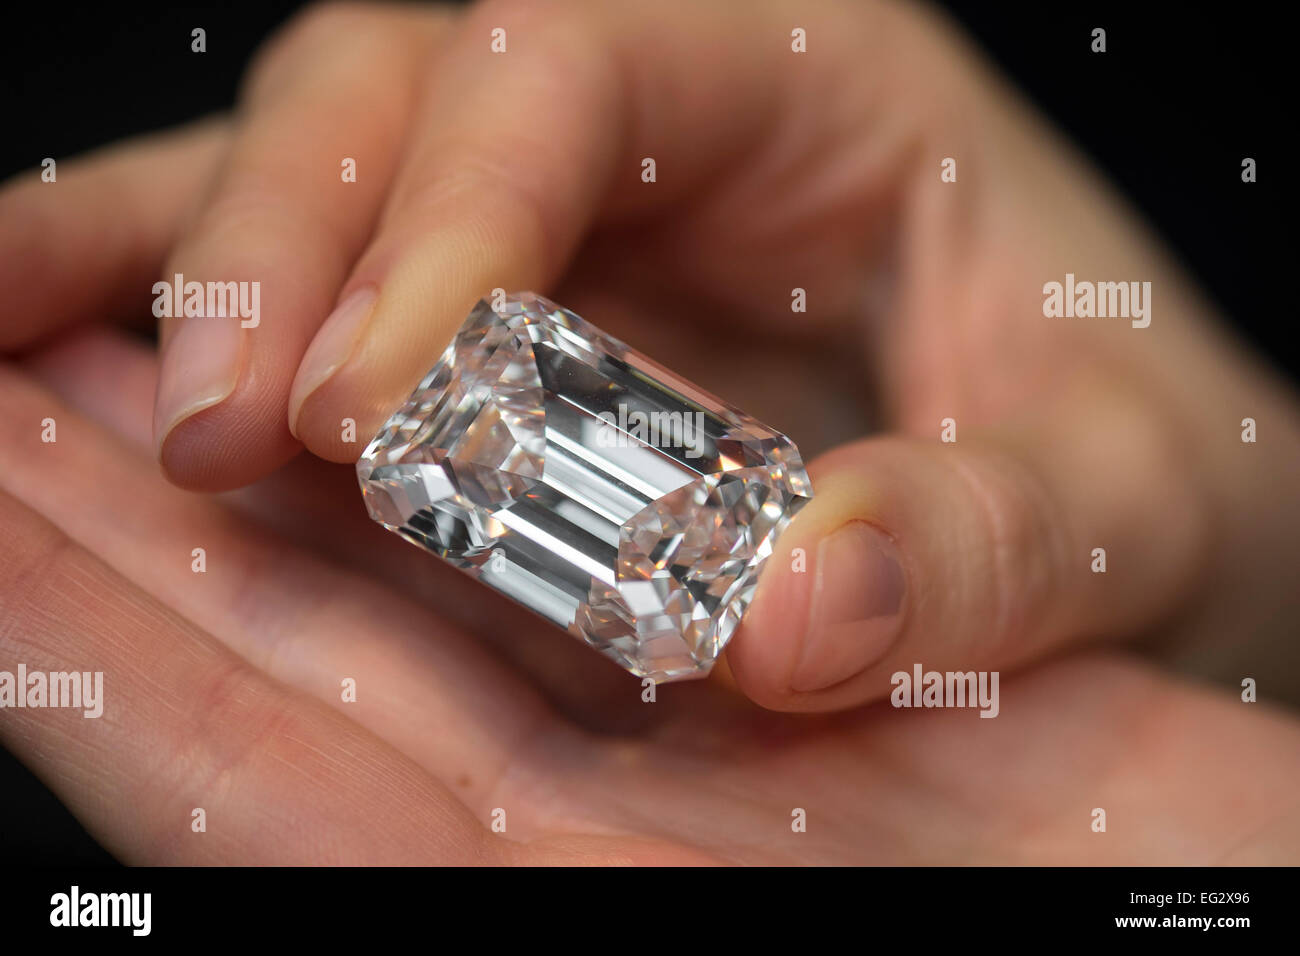 Sotheby's unveils a 100-carat perfect diamond in a classic Emerald-cut, and internally flawless, at Sotheby's, London, UK on 13th February 2015. Due to be auctioned at Sotheby's Magnificent Jewels Auction in New York on 21st April 2015, where it's estimated to sell for US$19-25 million. Stock Photo